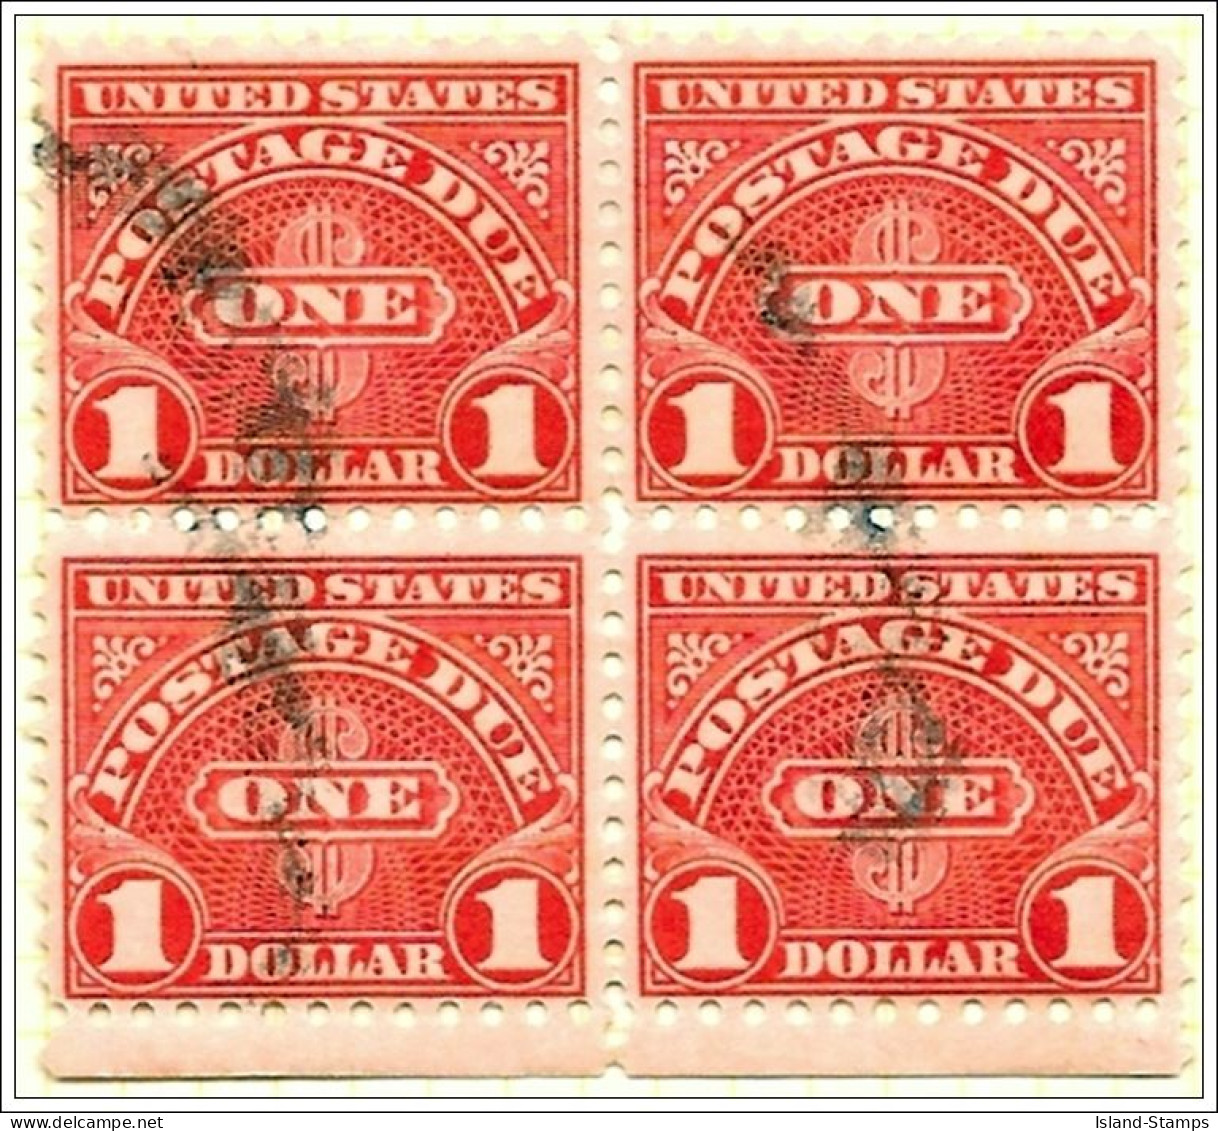 USA 1930/31 Block Of Four $1 Postage Dues Used - Usati